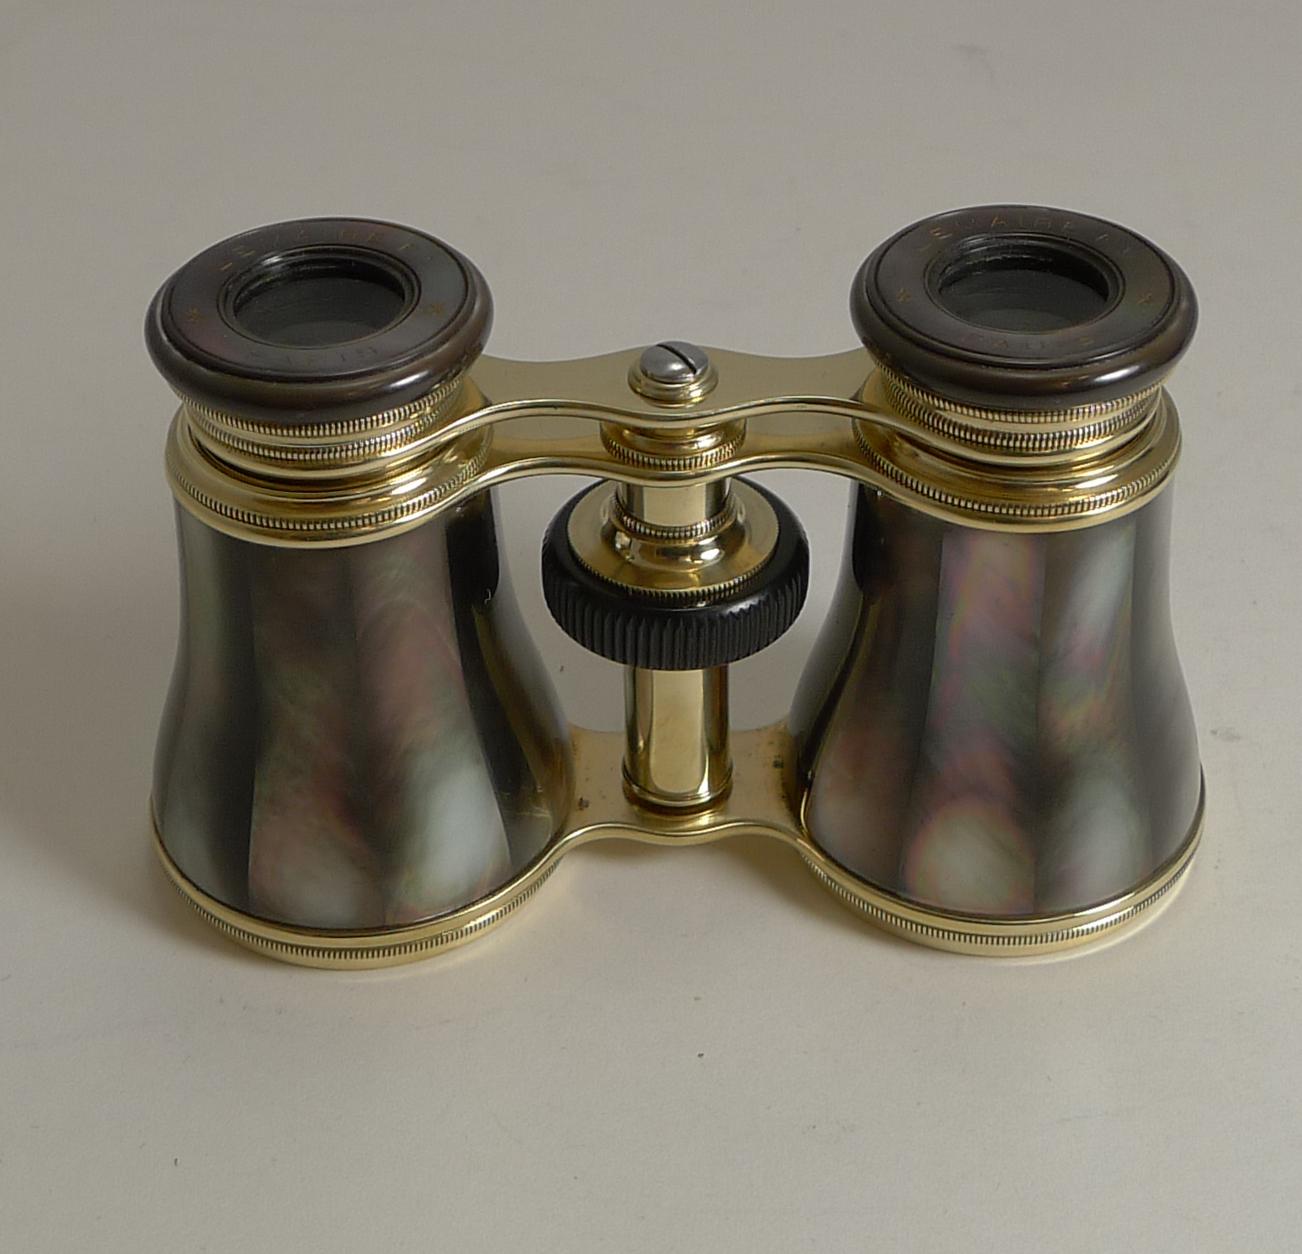 A truly exquisite pair of Opera Glasses by the top-notch maker, LeMaire of Paris 2